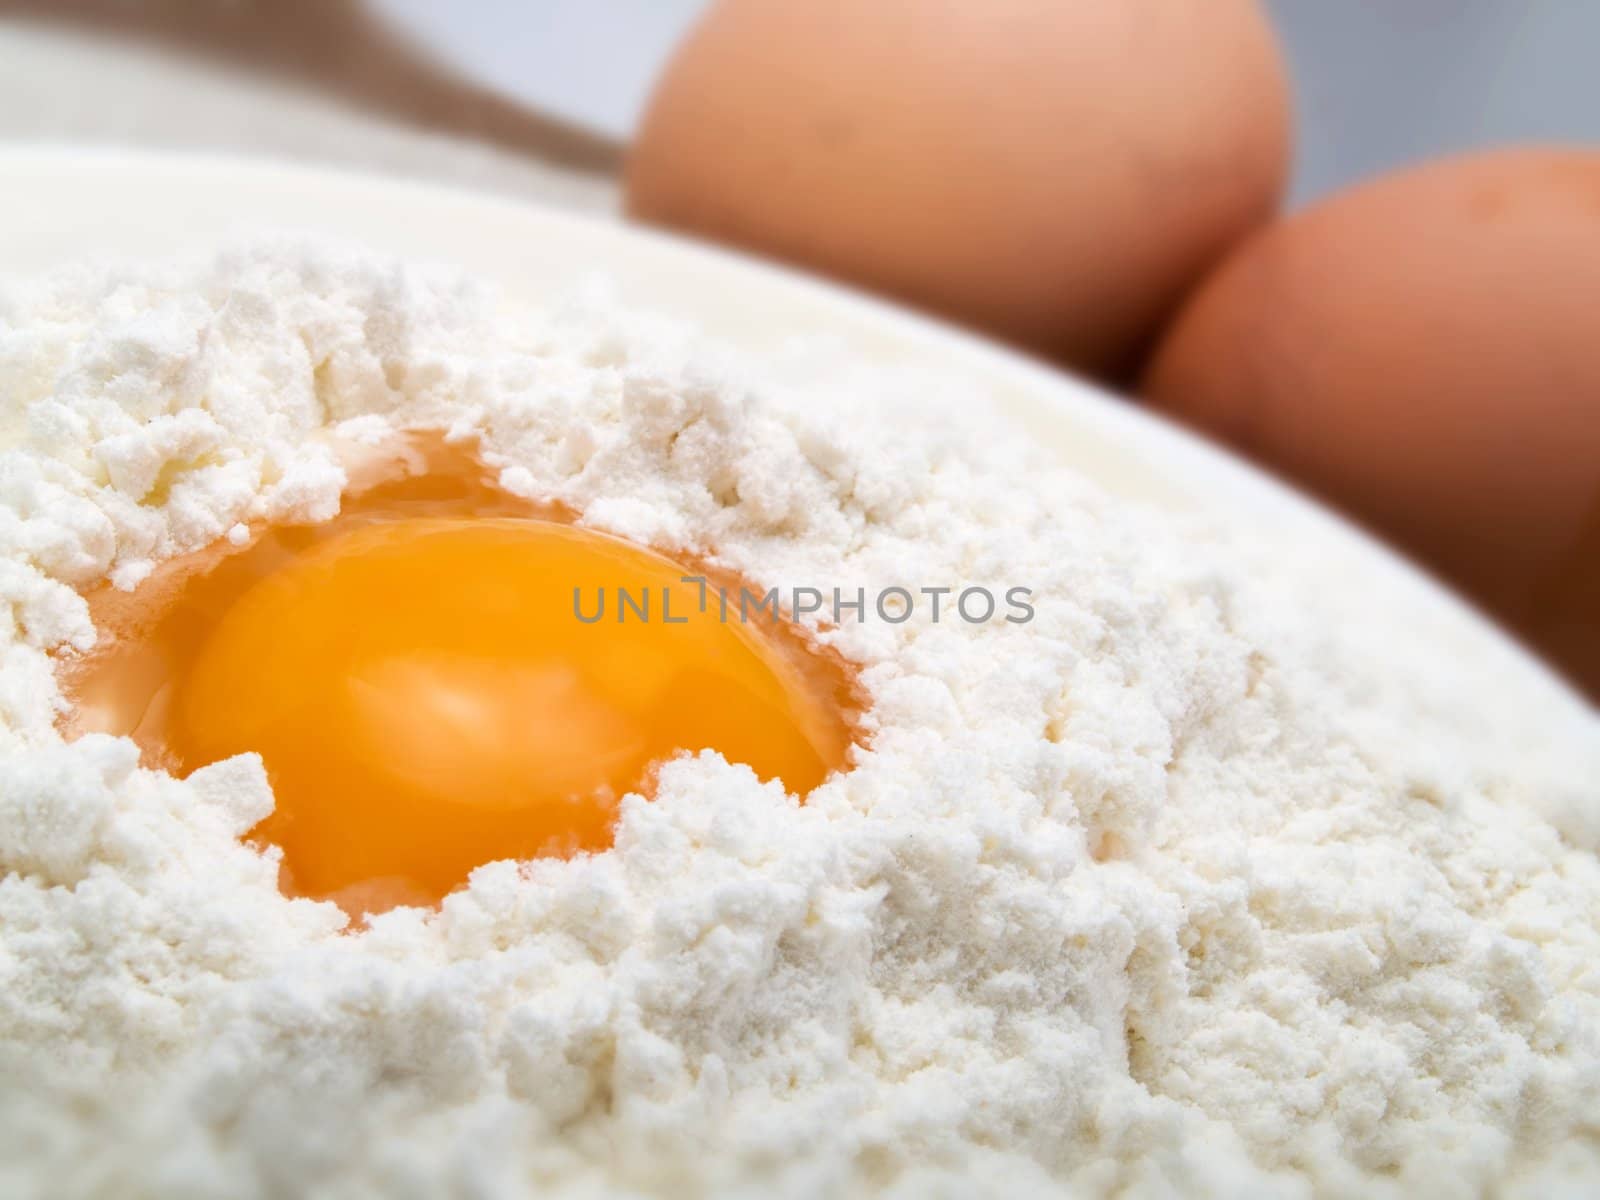 Egg and flour in a white plate